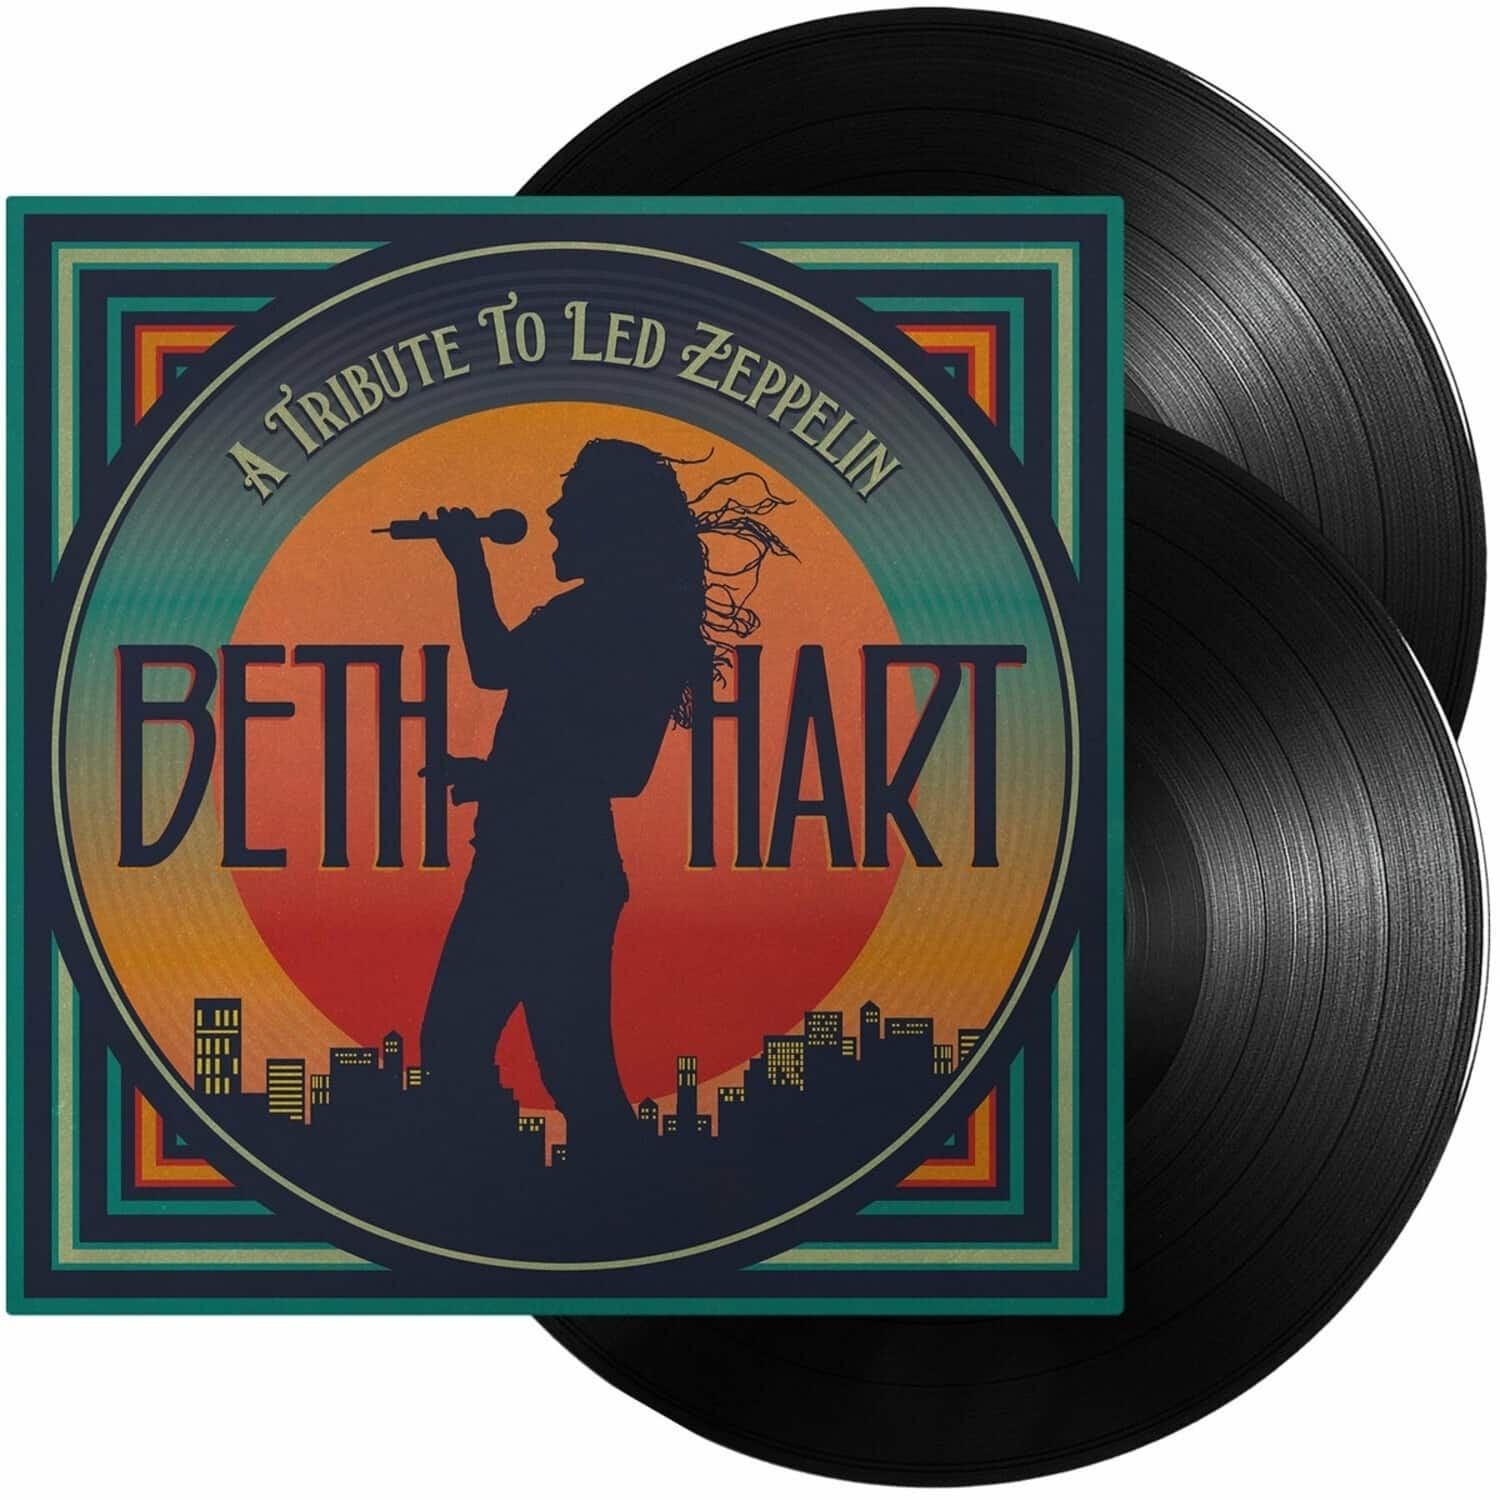 Beth Hart - A TRIBUTE TO LED ZEPPELIN 